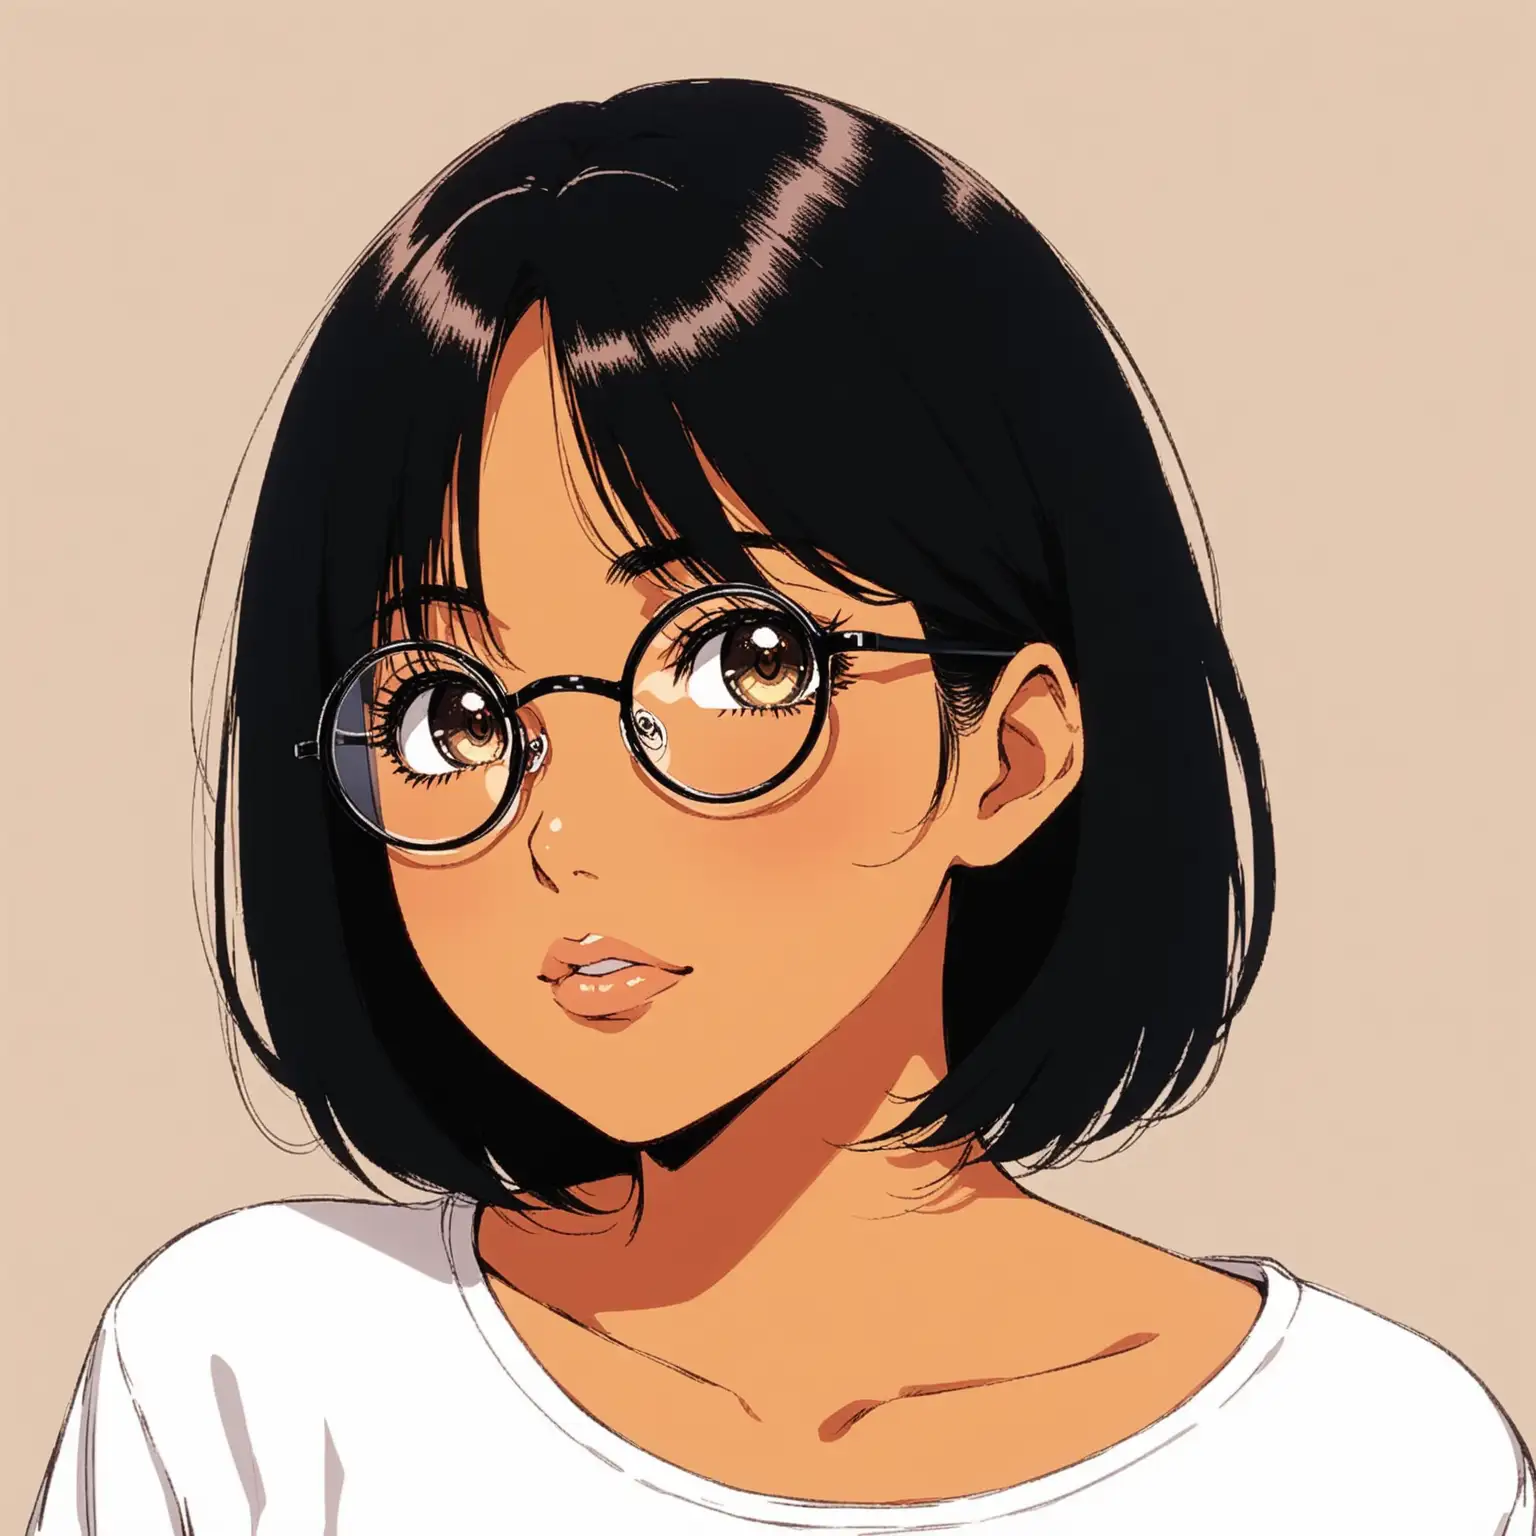 Anime Style Portrait of Woman with Tanned Skin and Black Round Eyeglasses